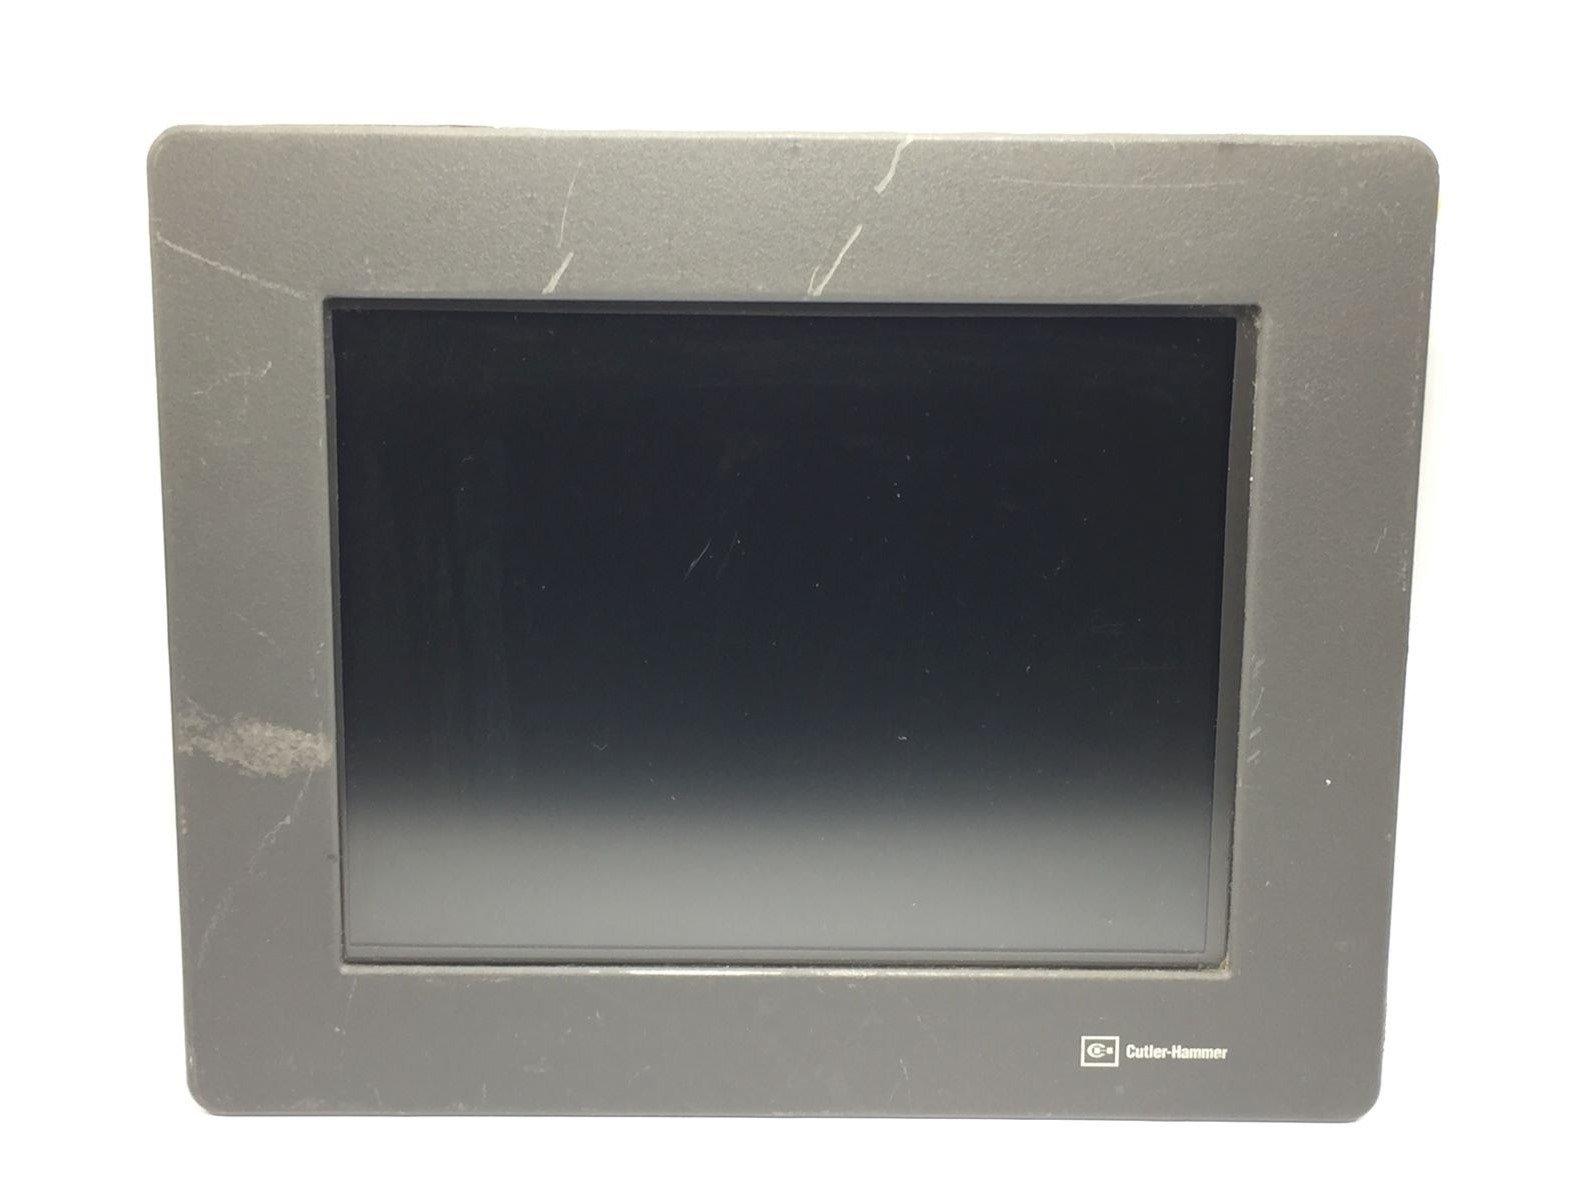 CUTLER HAMMER D710TFT14 TOUCH SCREEN PANEL TESTED 